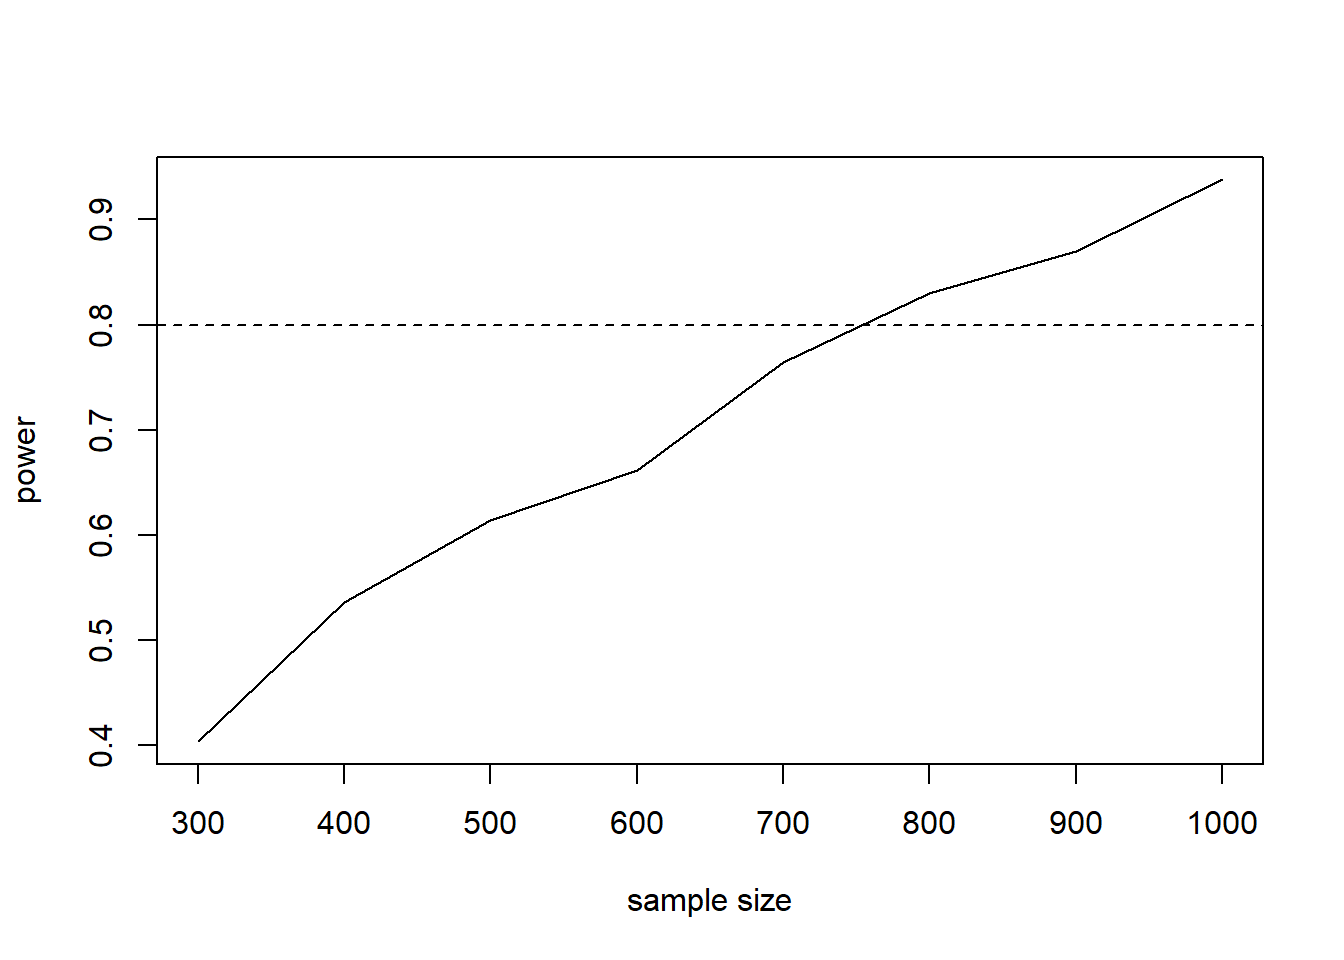 Plot of samples sizes on x axis ranging from 300 to 1000 versus power on y axis.